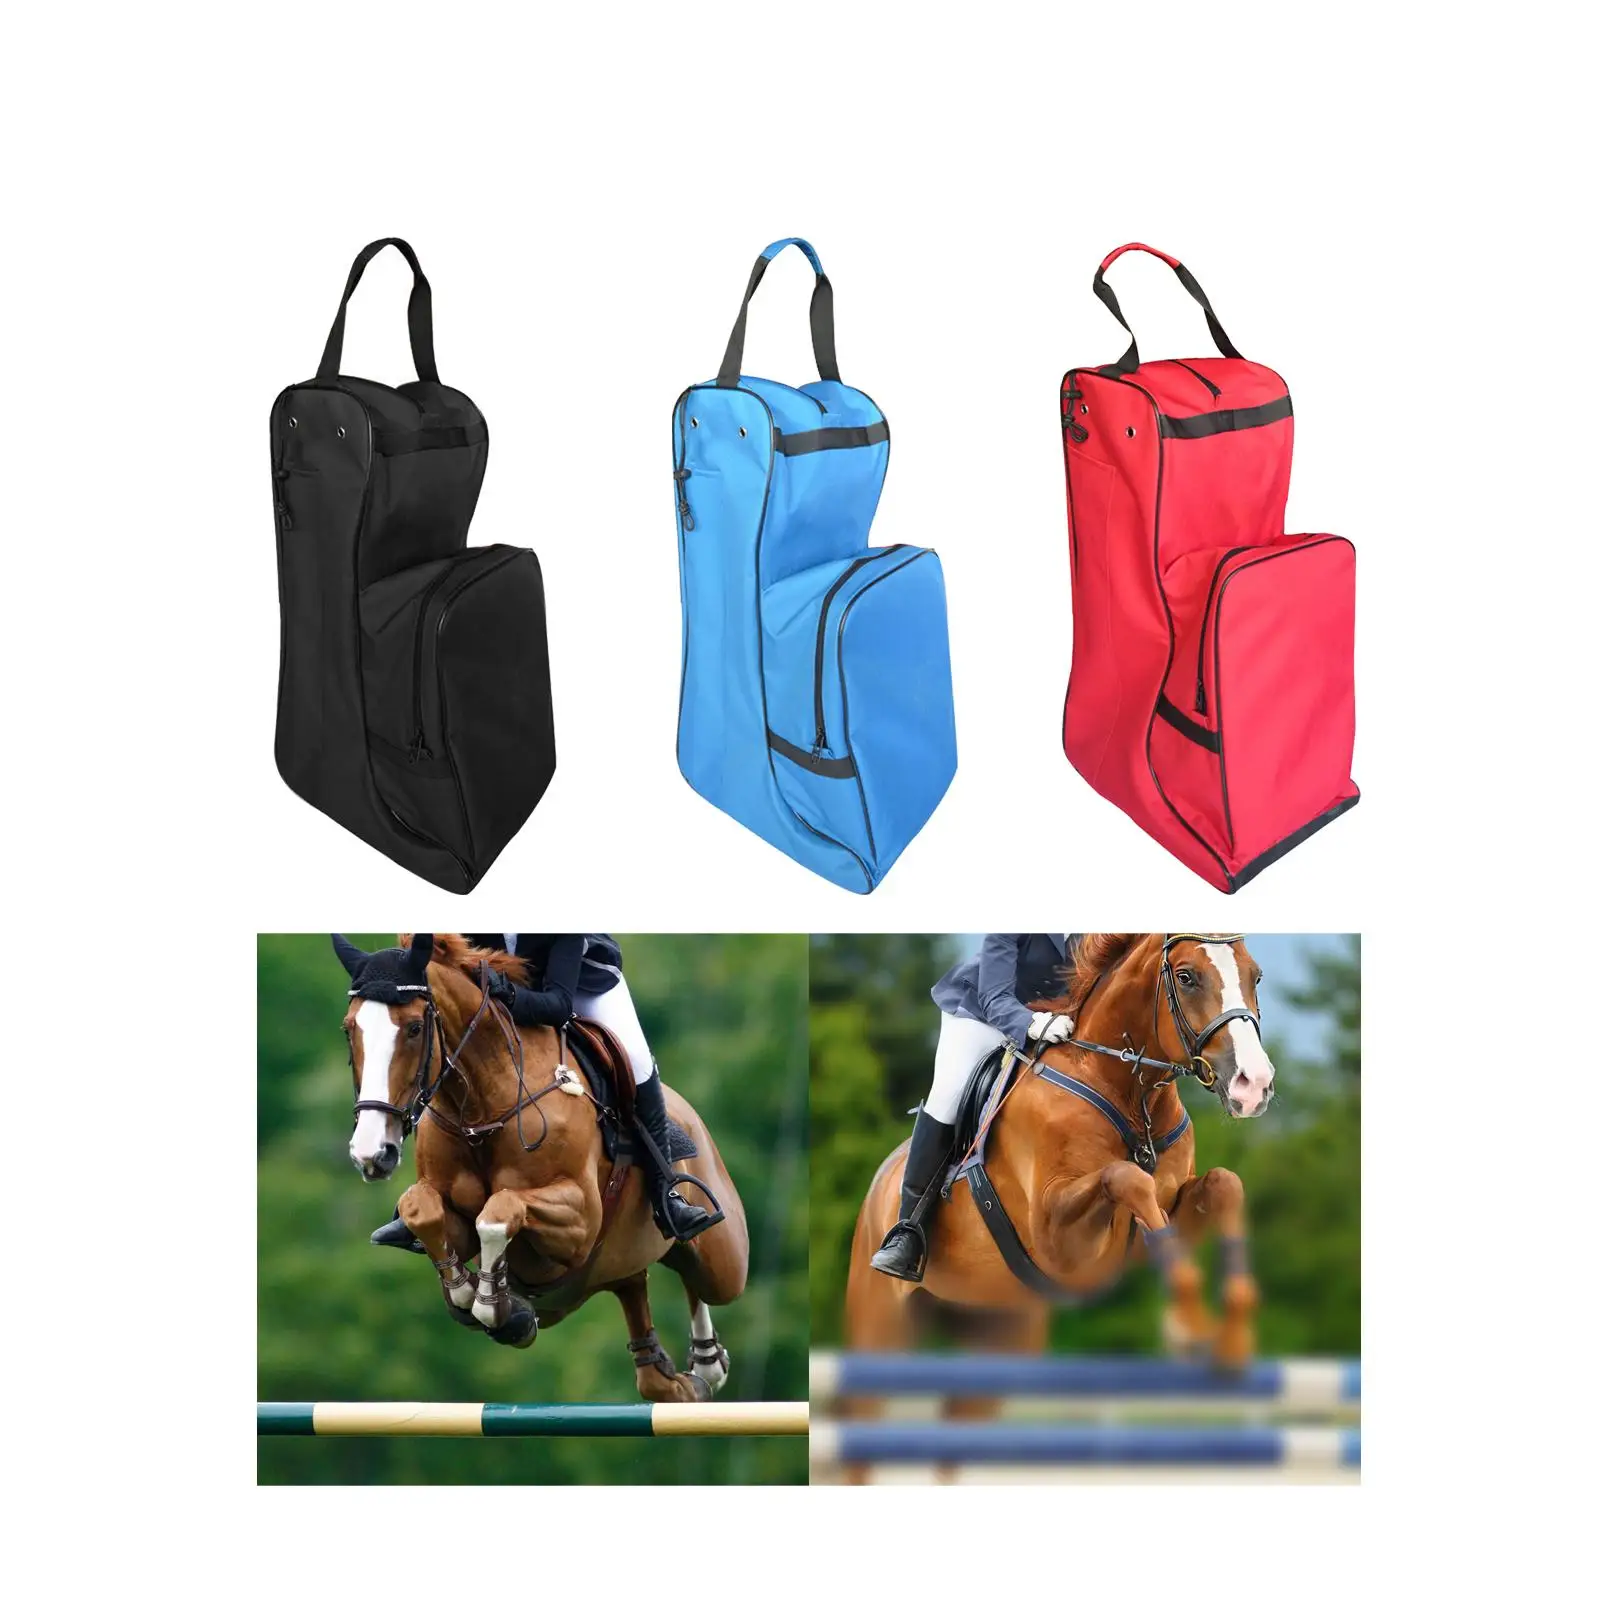 Equestrian Horse Riding Bag Boots Bag Multipurpose Large Capacity Organizer Zipper Closure for Equipment Commonly Used by Riders